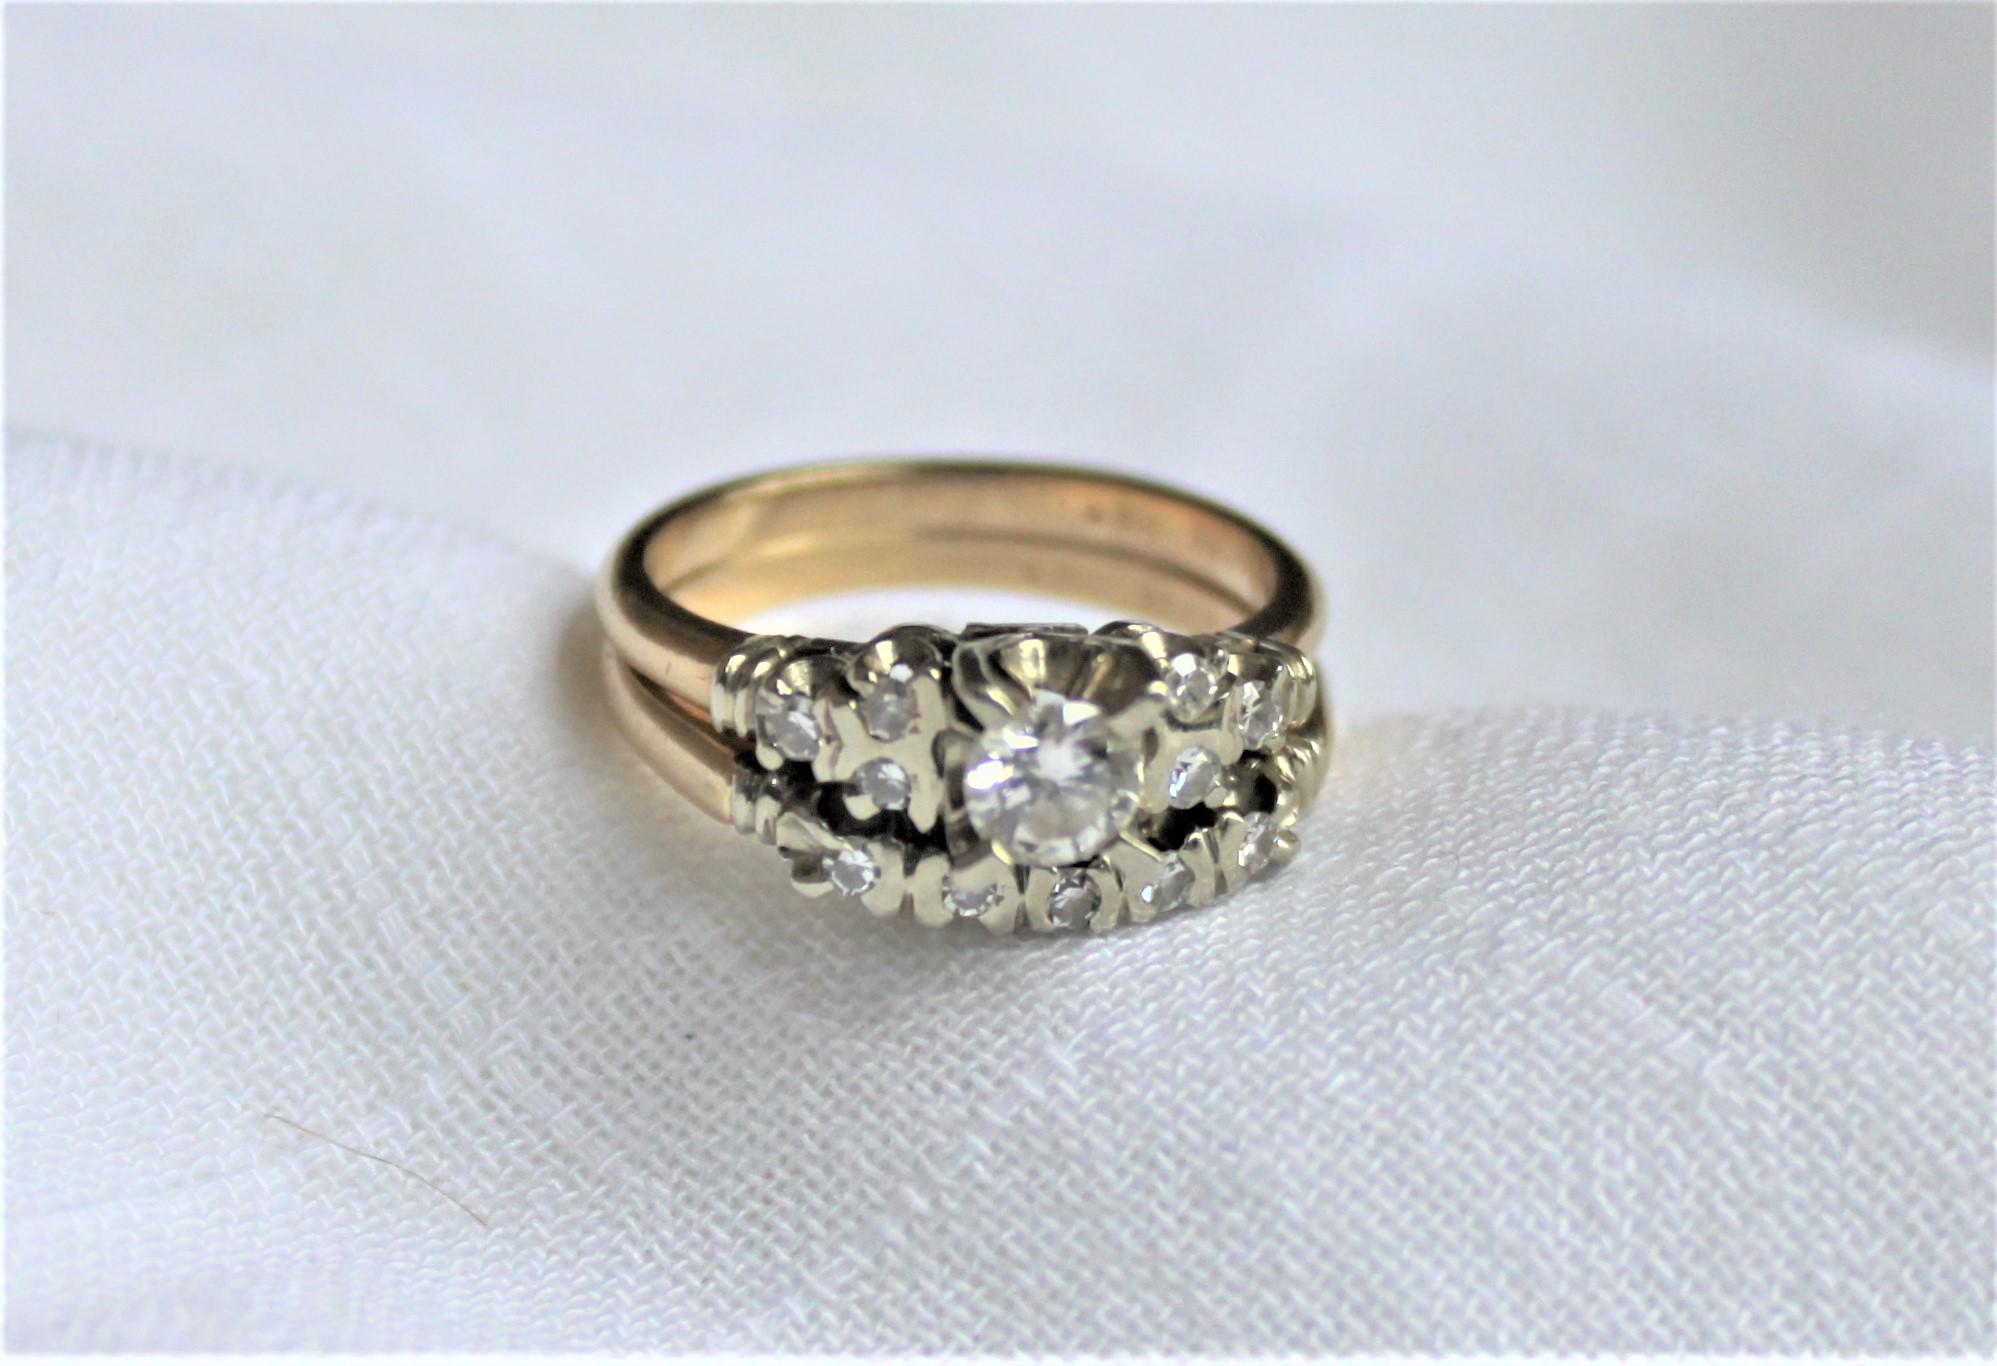 This ladies 14 karat yellow and white gold and diamond matching engagement ring and wedding band set was made during the 1960's, most likely in the United States. The engagement ring features one brilliant cut and prong set diamond with a clarity